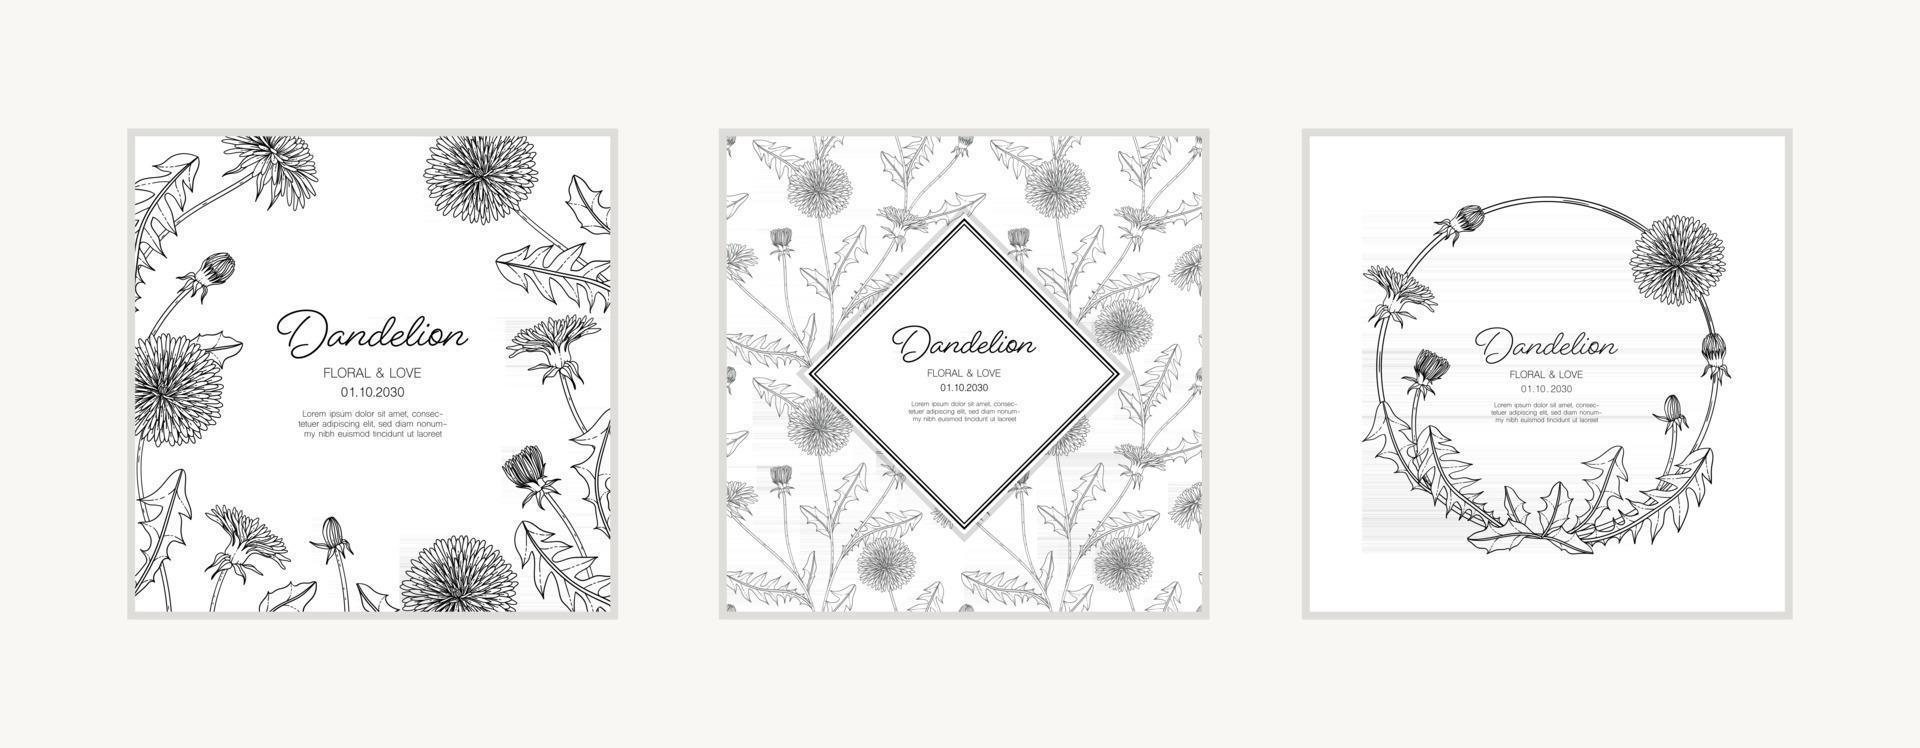 Hand drawn dandelion floral greeting card background. vector